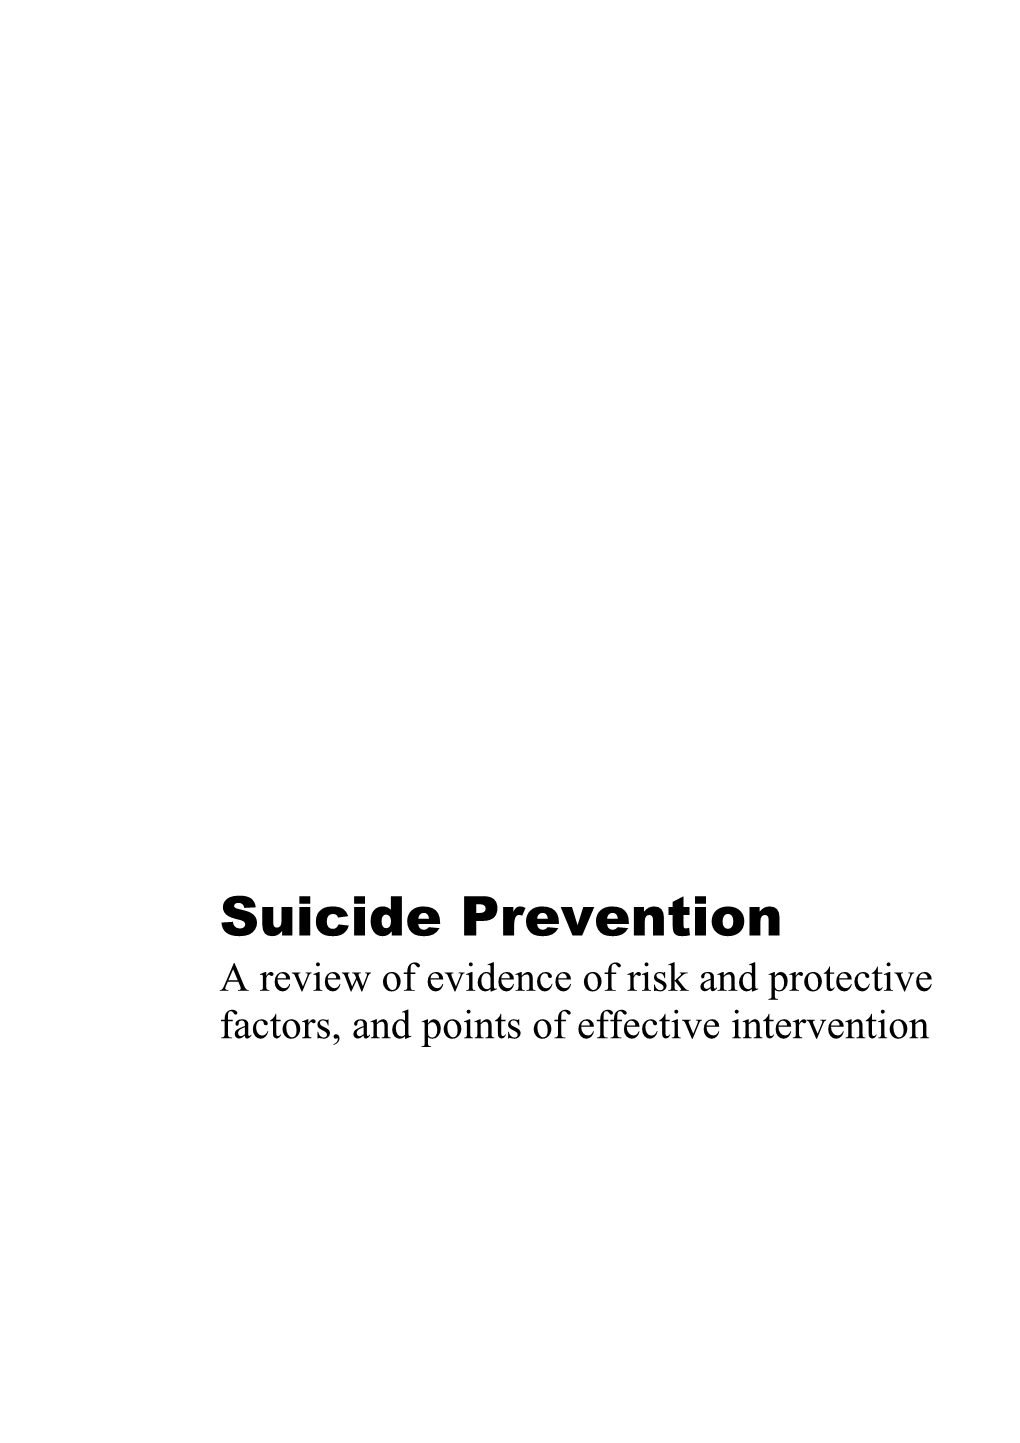 Suicide Prevention - a Review of Evidence of Risk and Protective Factors, and Points Of